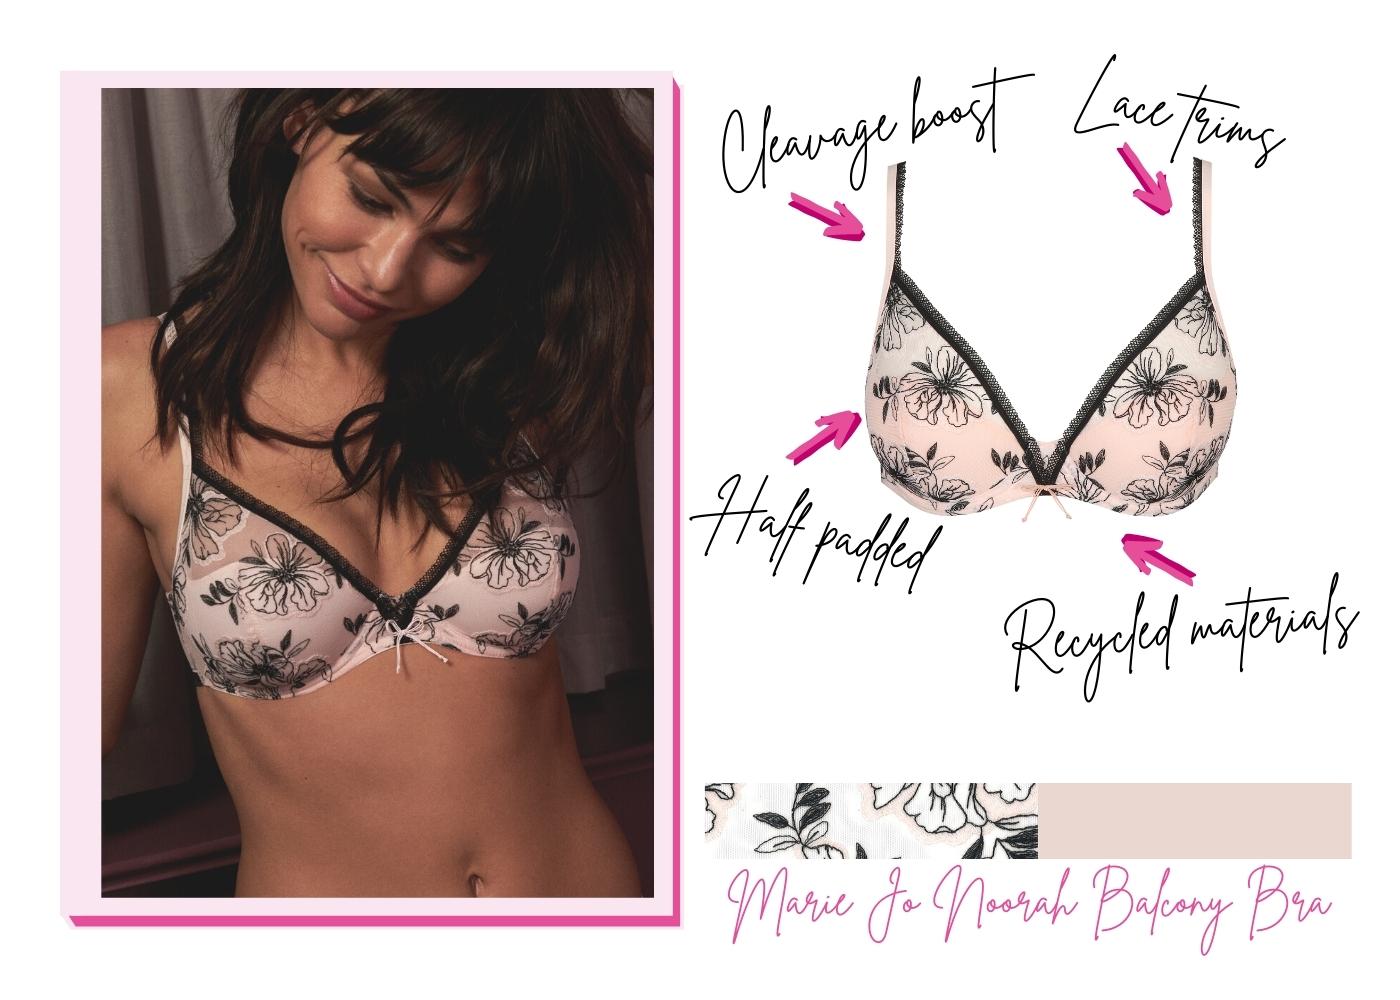 Smallest Bra Size: Most Common Questions